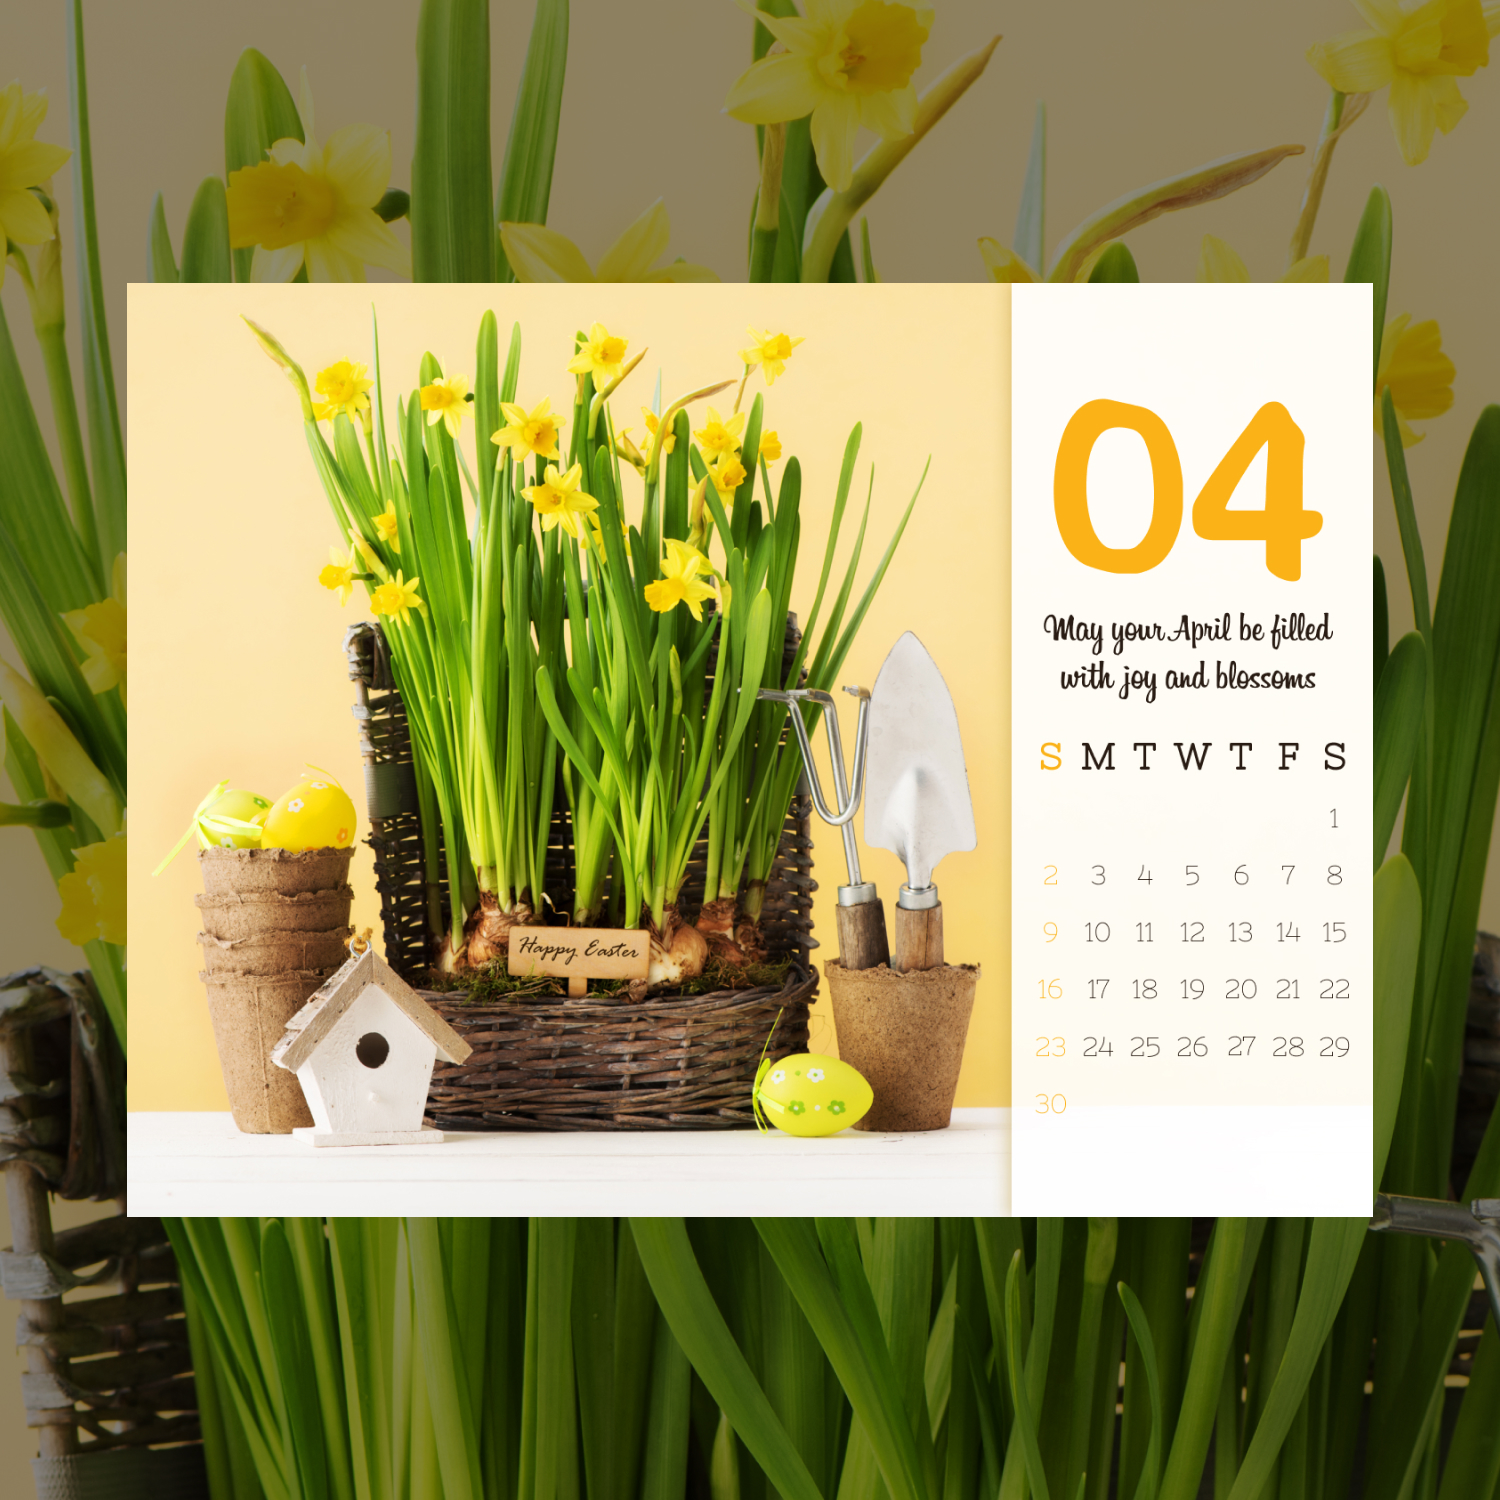 Calendar with a basket of daffodils on a table.